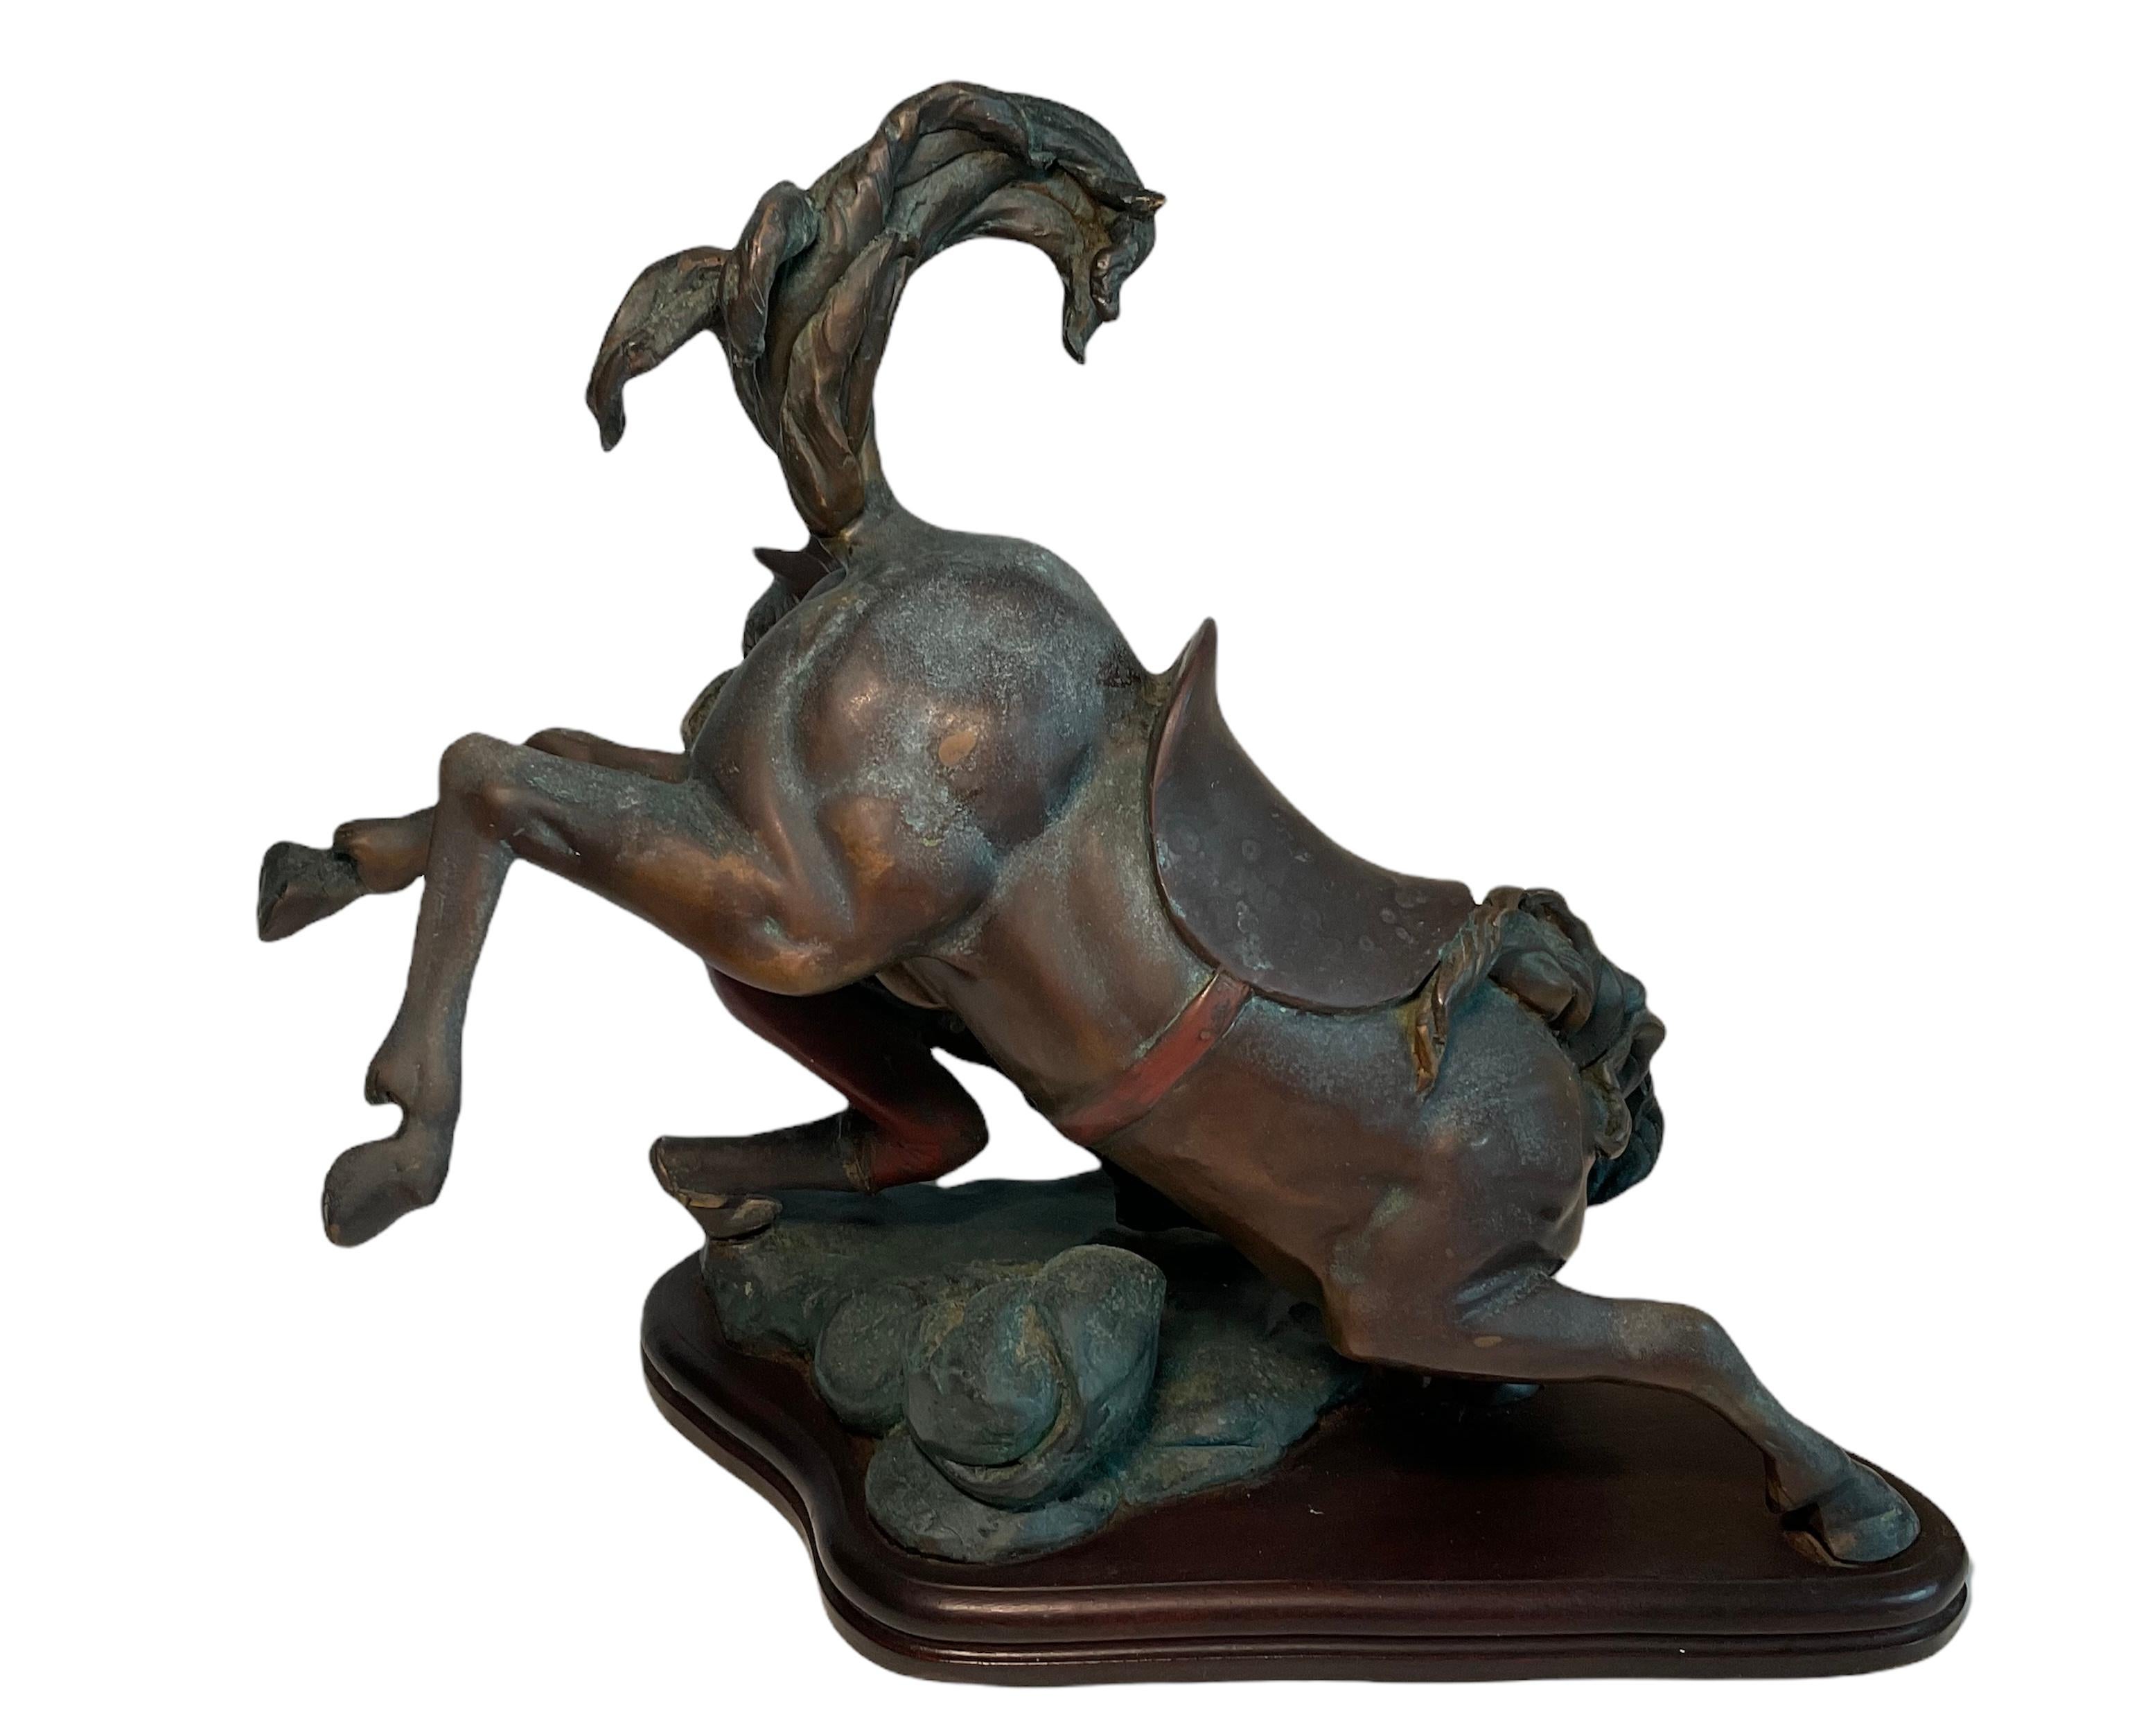 This is a rare and very well done bronze sculpture depicting a cowboy who is standing in the soil and has finally conquered a bucking horse in a rodeo. The clothes of the bronze cowboy and the saddle back billet are painted. The mane and tail almost